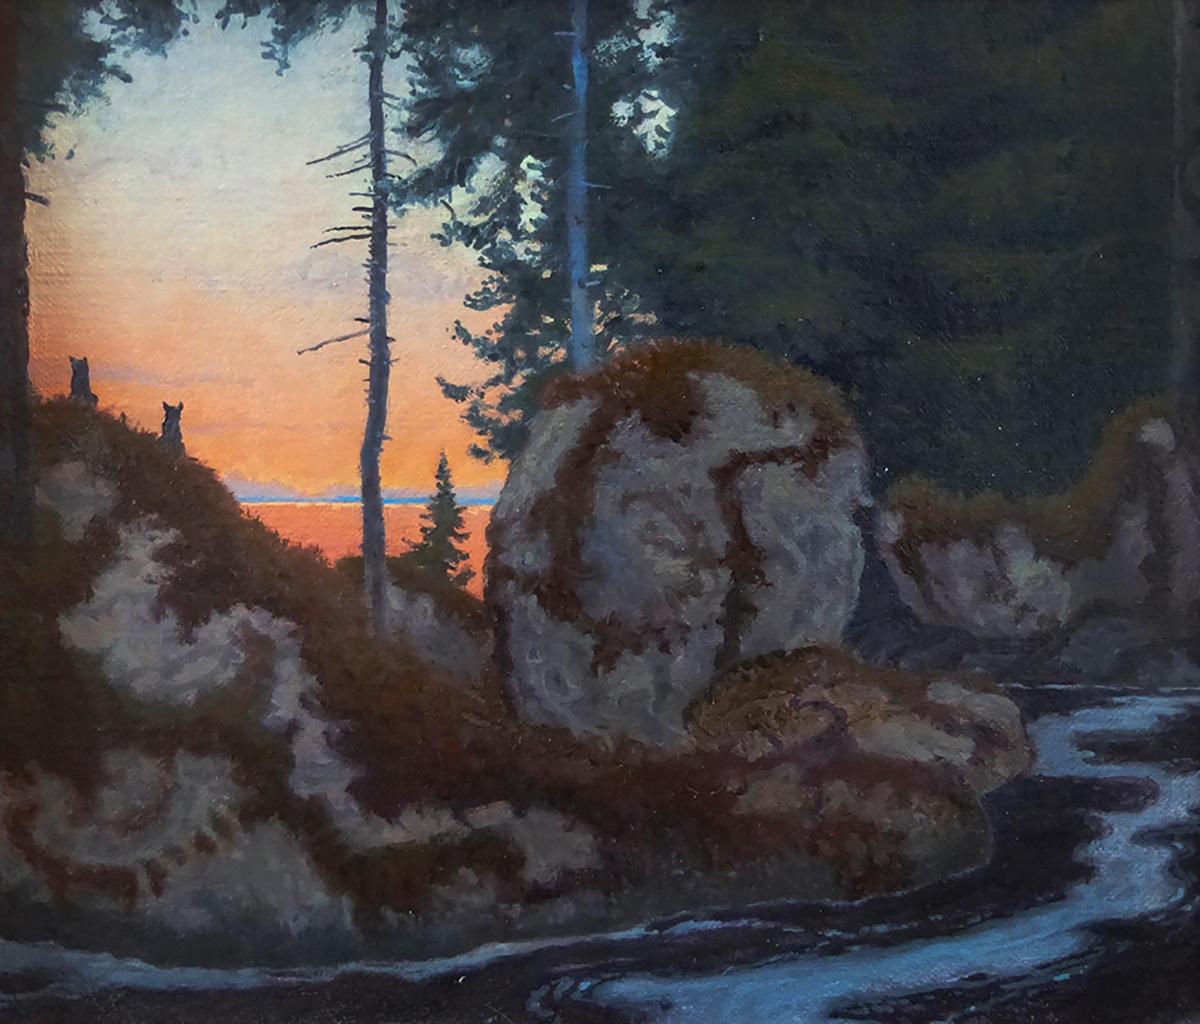 Forest Landscape with River, Bear and Susnset